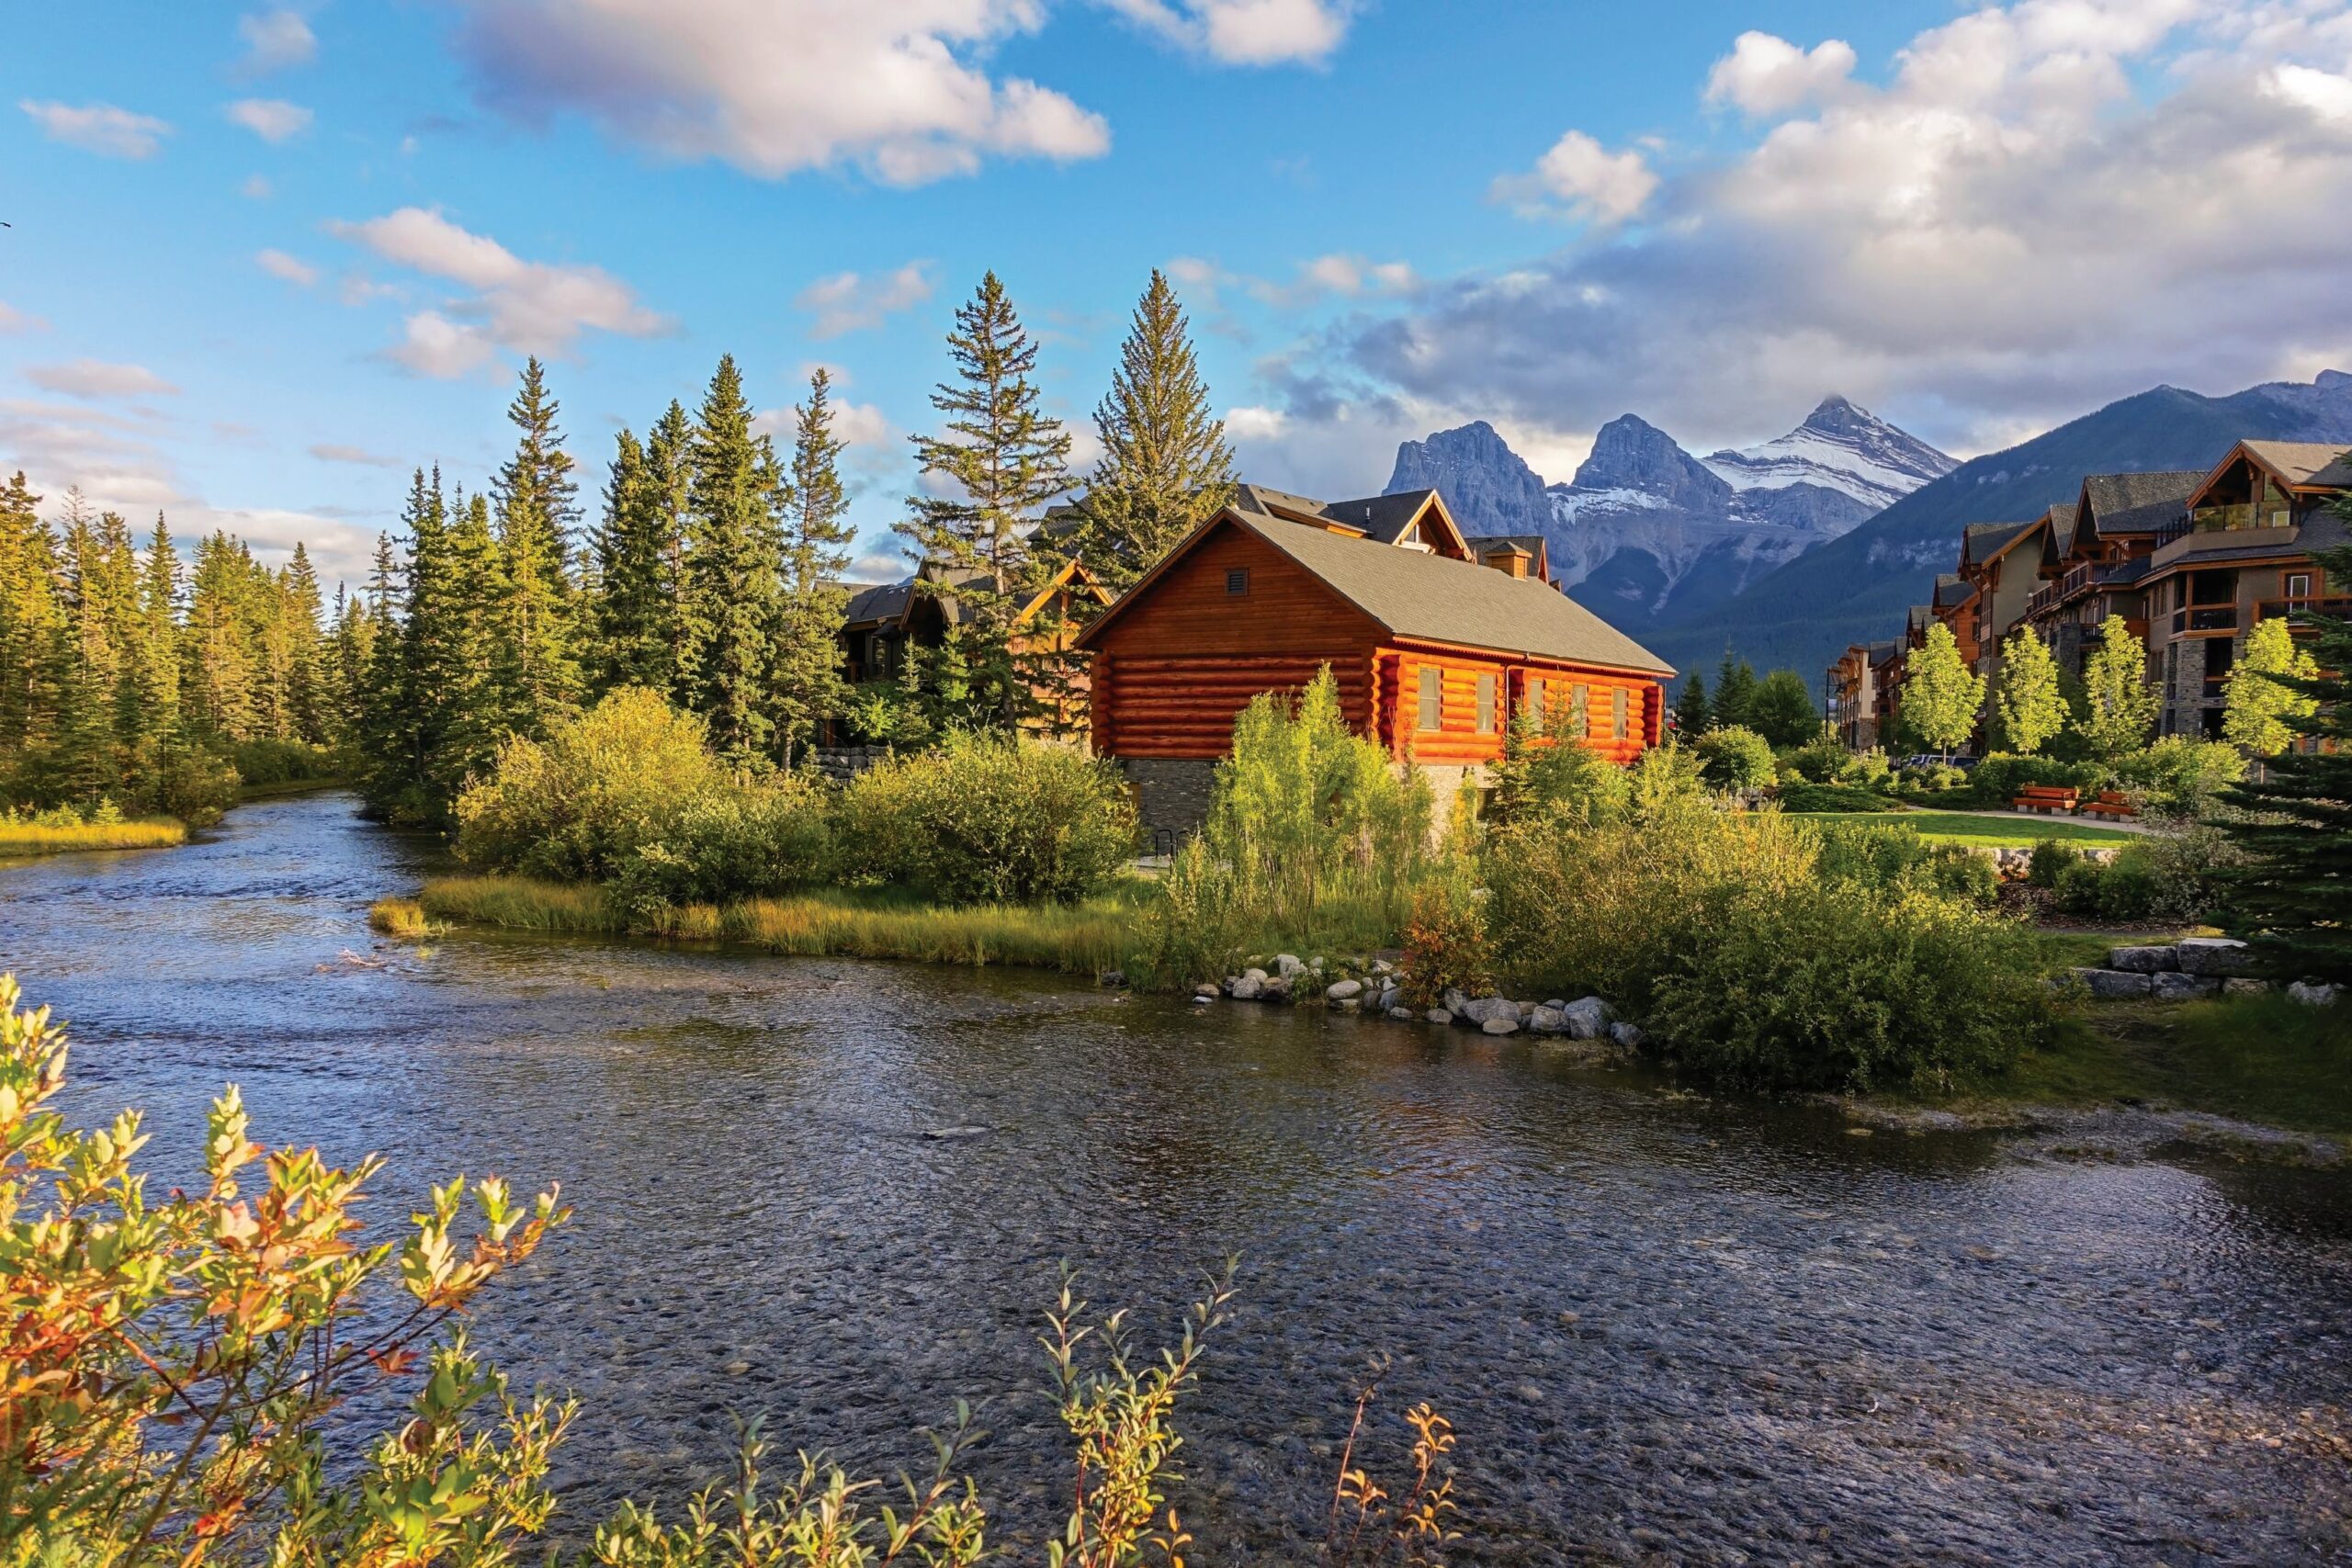 beautiful cabin near a river with mountains in the background